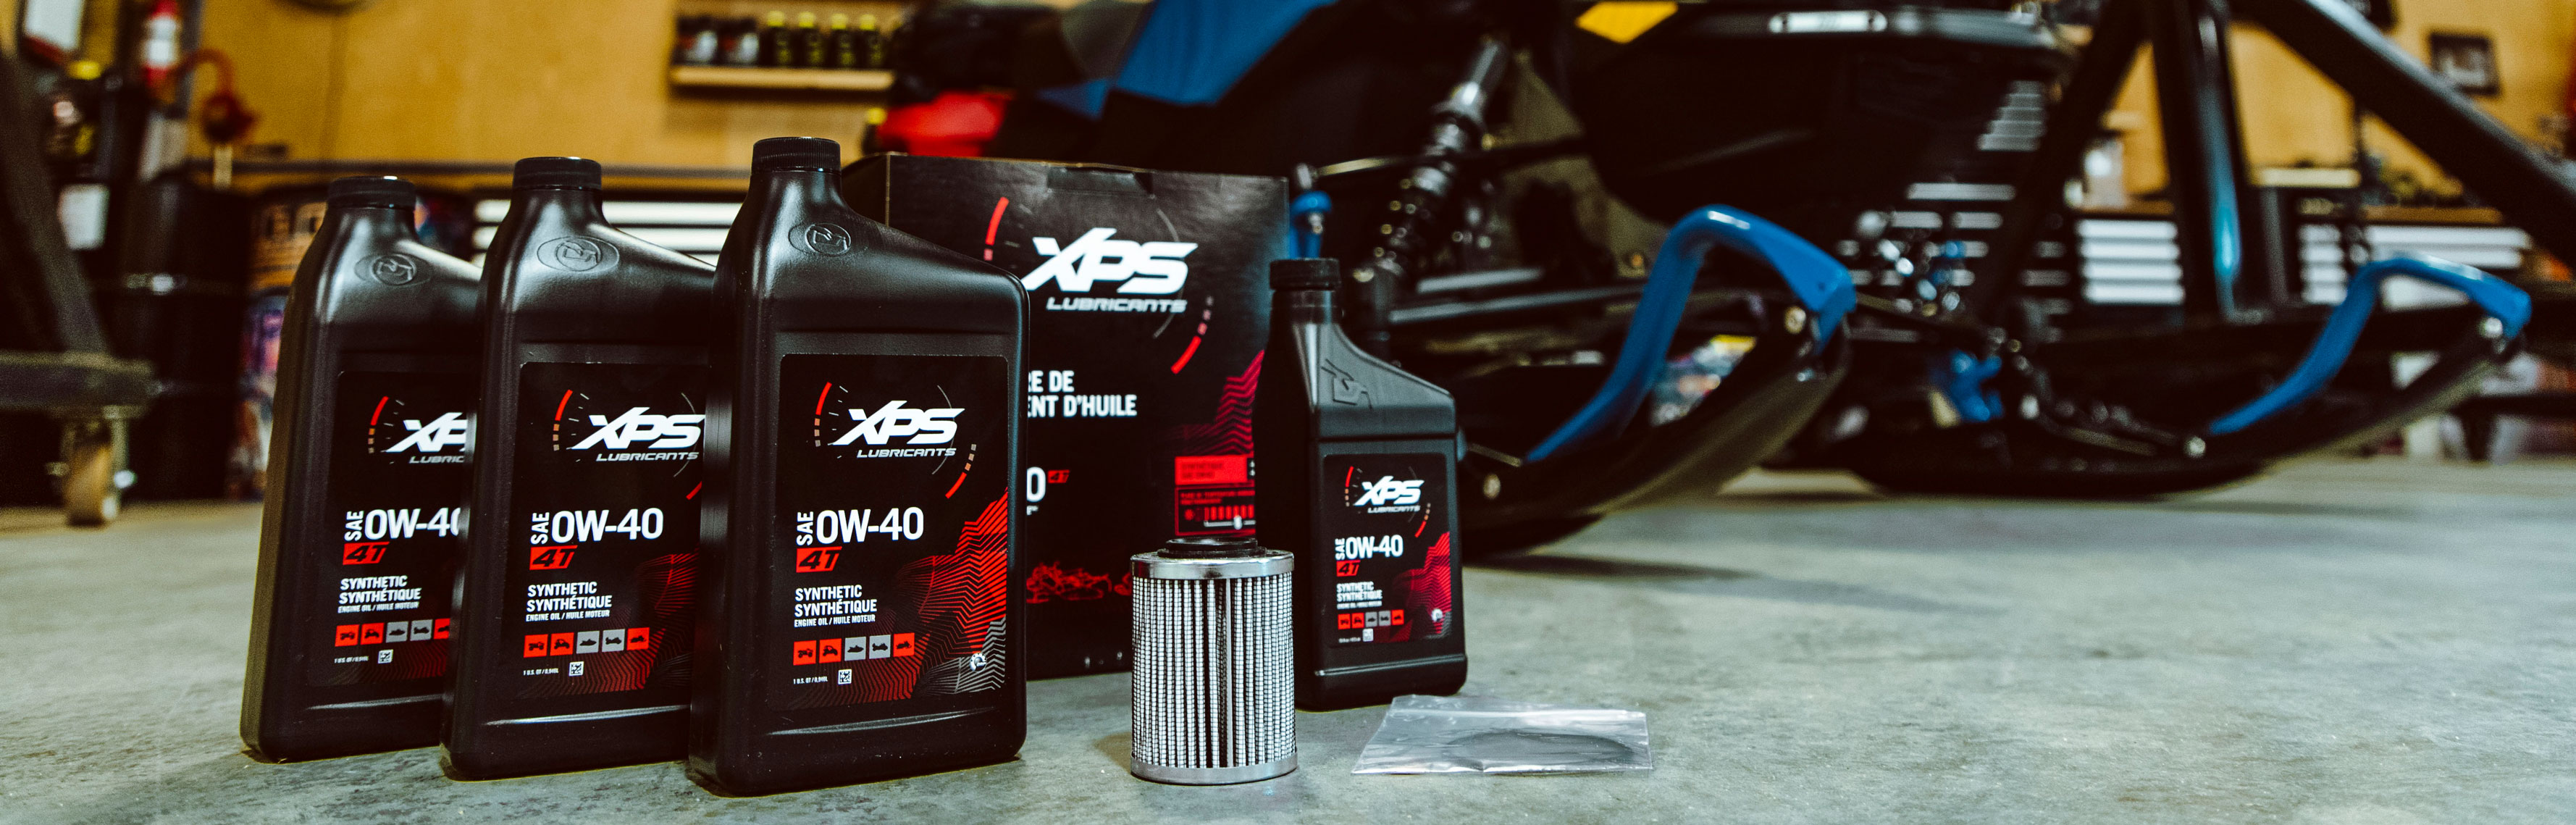 XPS Lubricants and Oil for Summerize your snowmobile